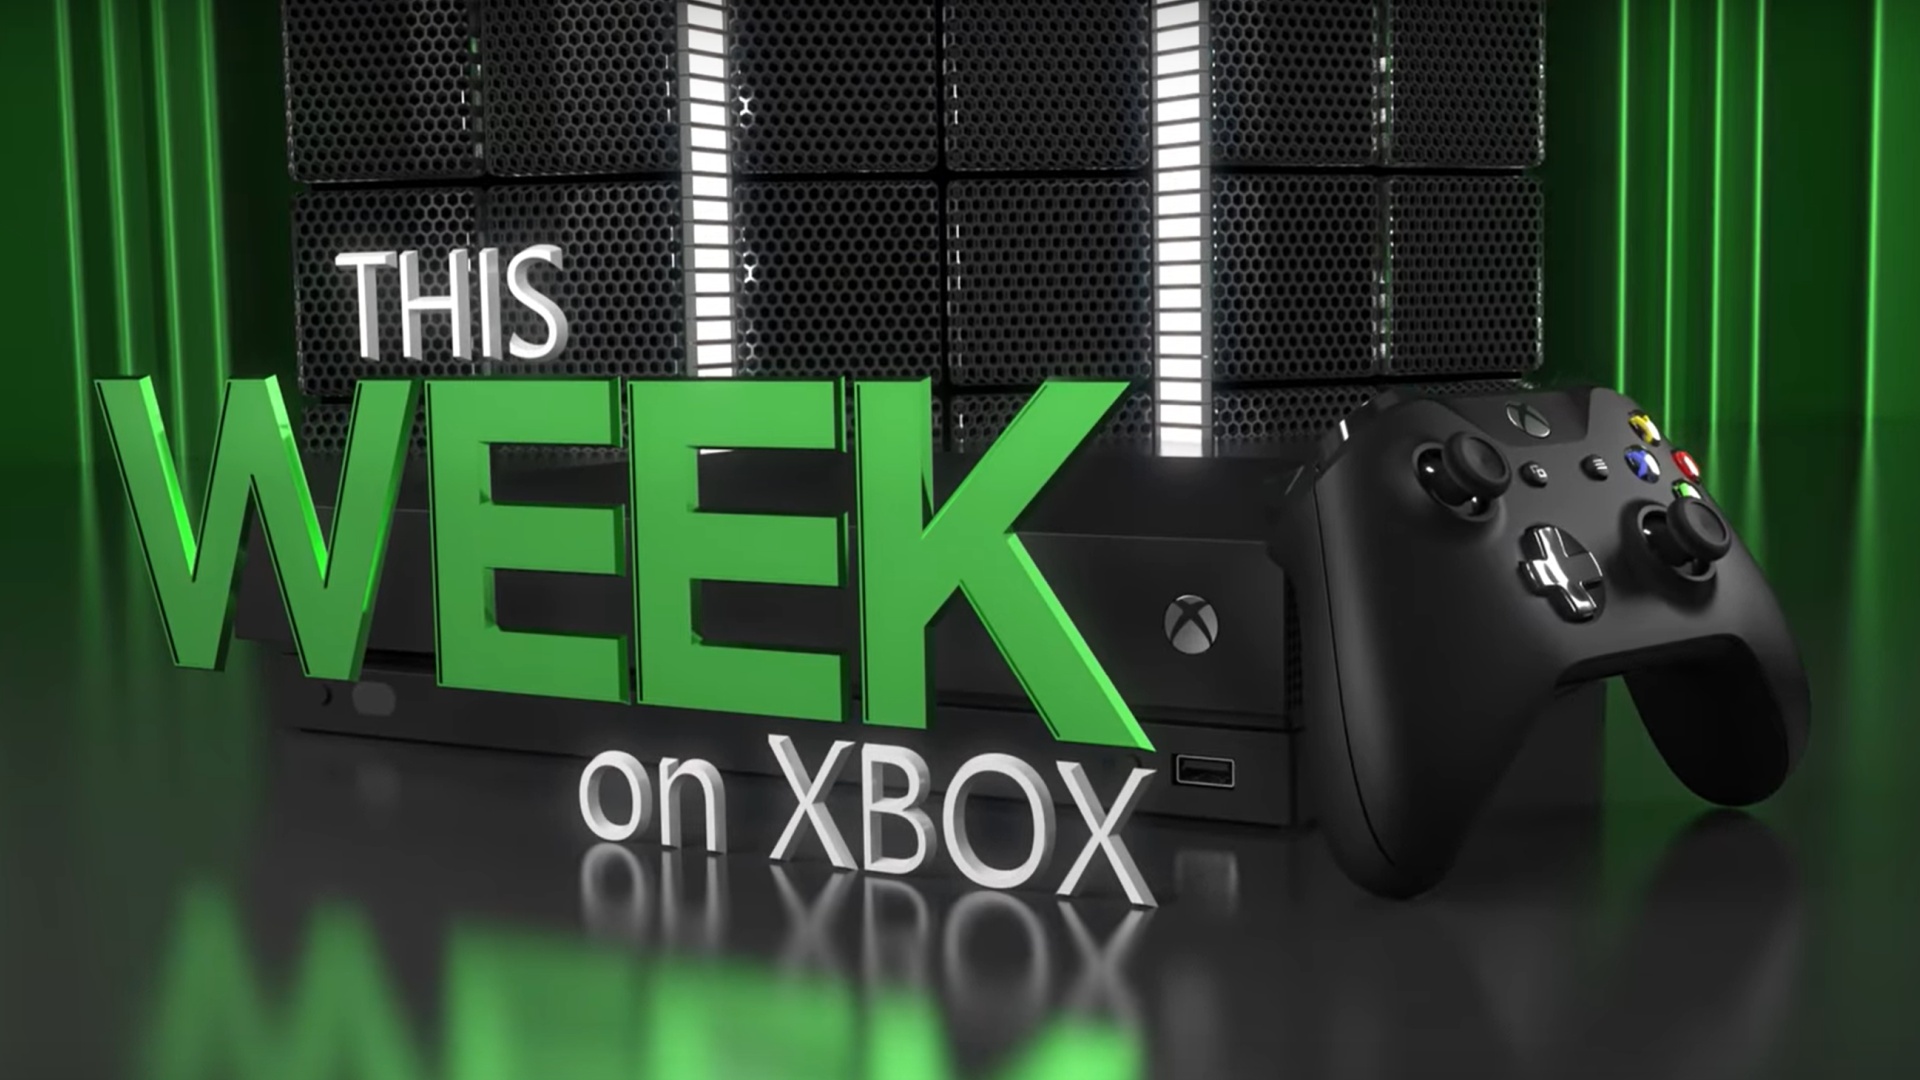 Video For This Week on Xbox: February 21, 2020